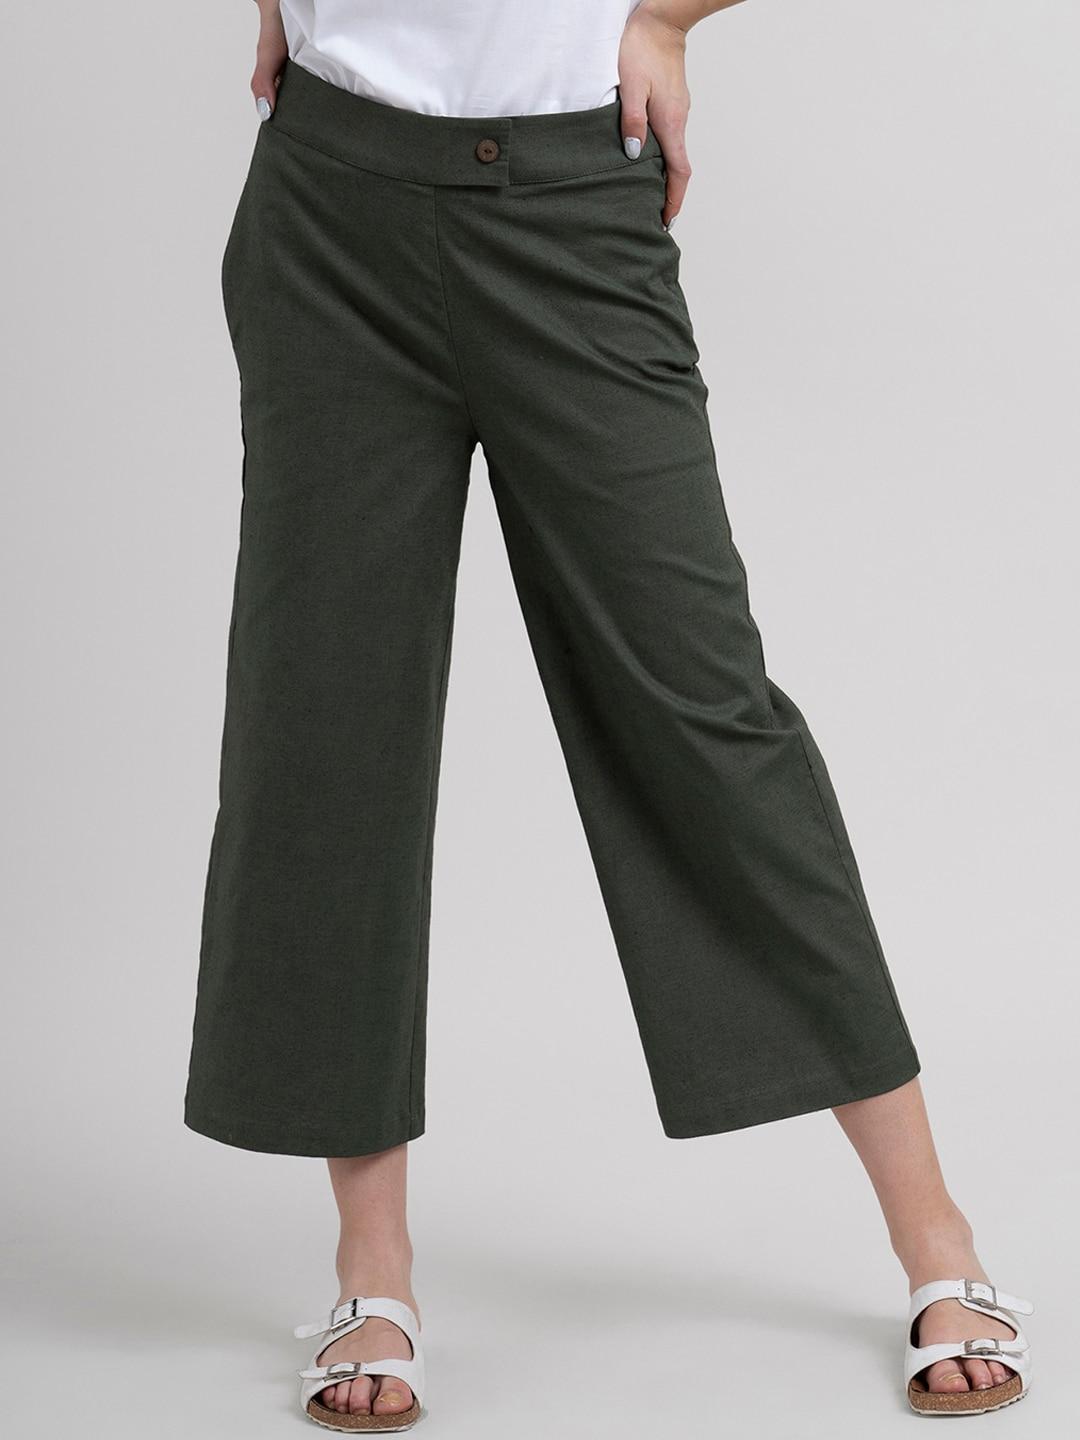 FableStreet Women Olive Green Comfort Flared Culottes Trousers